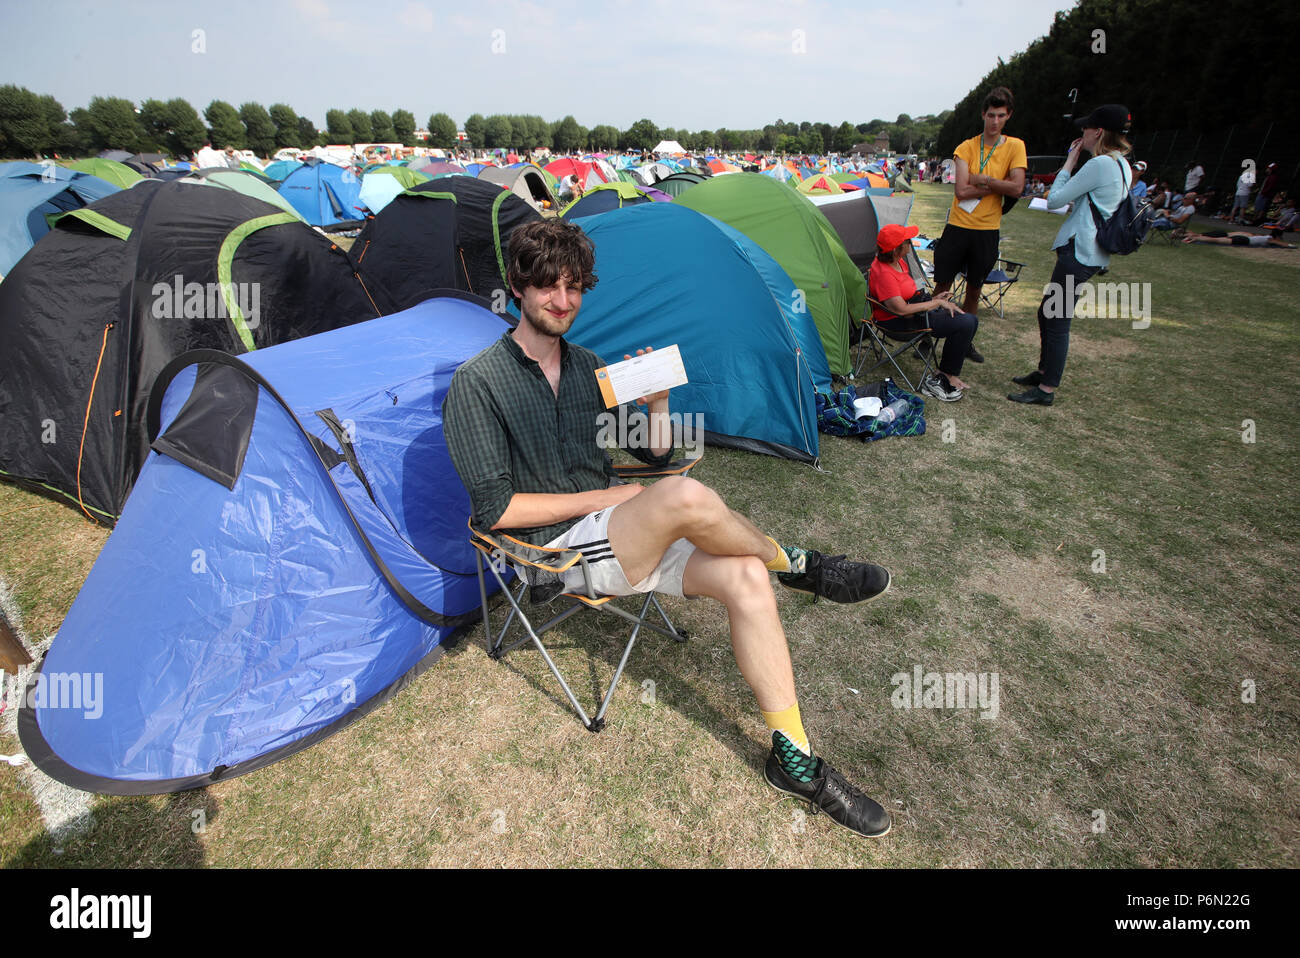 Darius Platt-Vowles from Gloucestershire is first in the queue ahead of the 2018 Wimbledon Championships at The All England Lawn tennis and Croquet Club, Wimbledon.at the All England Lawn tennis and Croquet Club, Wimbledon. Stock Photo